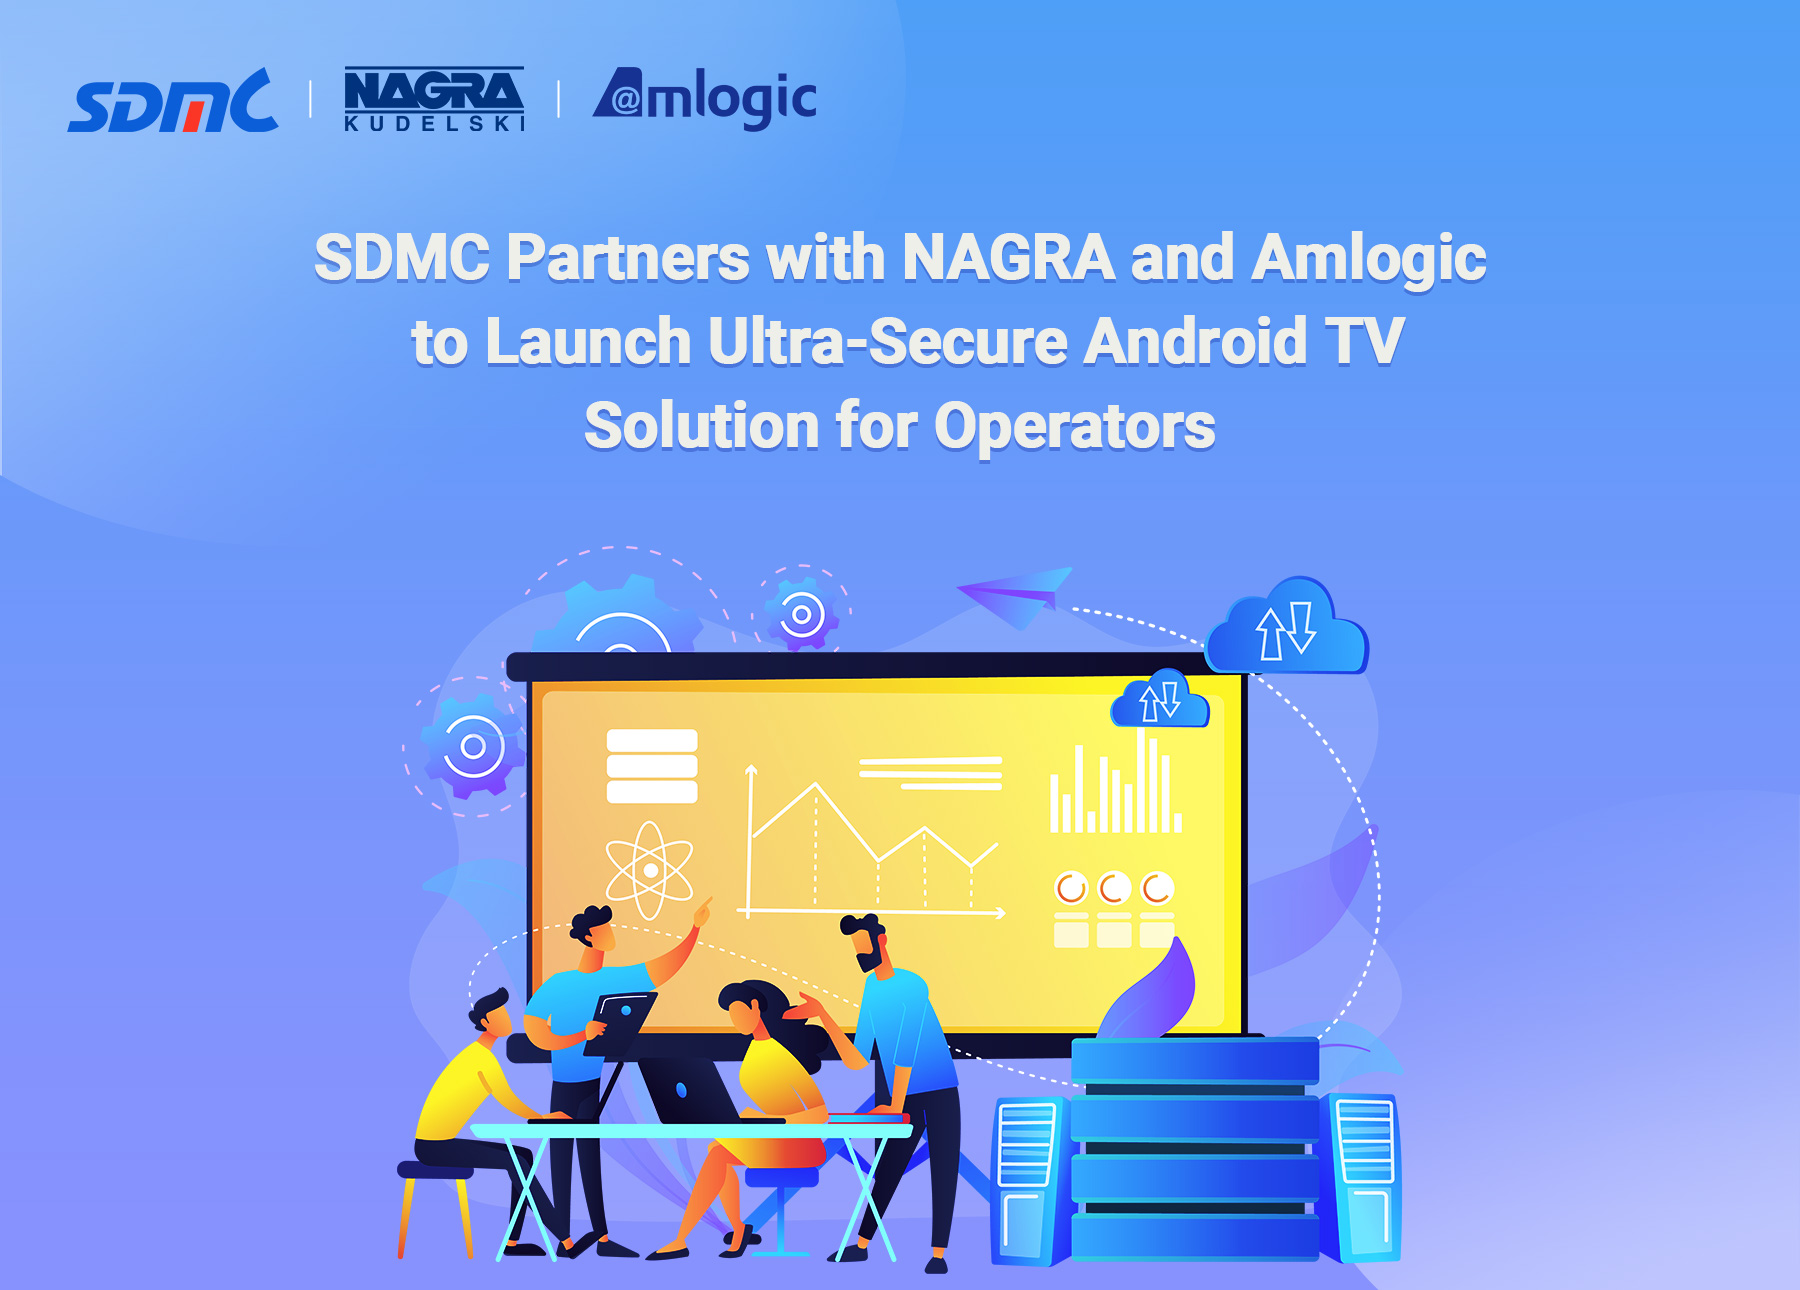 SDMC Partners with NAGRA and Amlogic to Launch Ultra-Secure Android TV Solution for Operators 